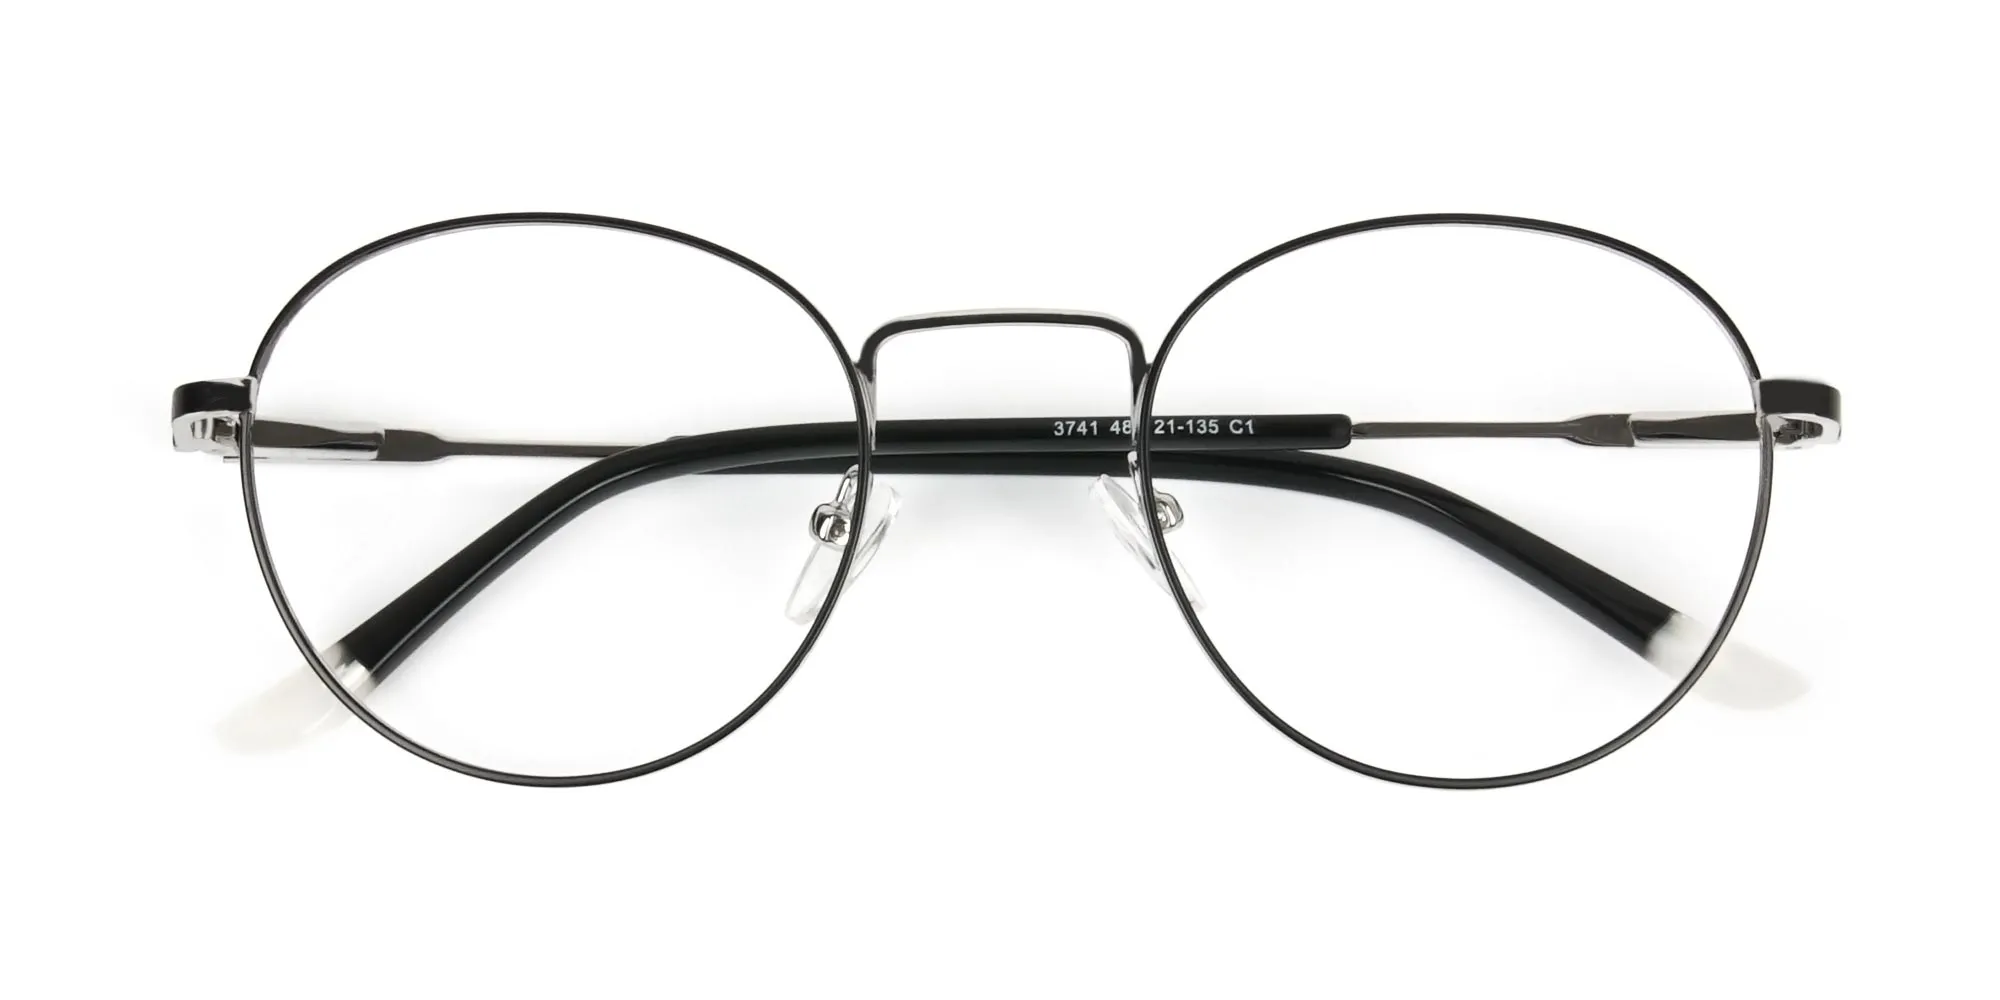 Black & Silver Round Spectacles - 2